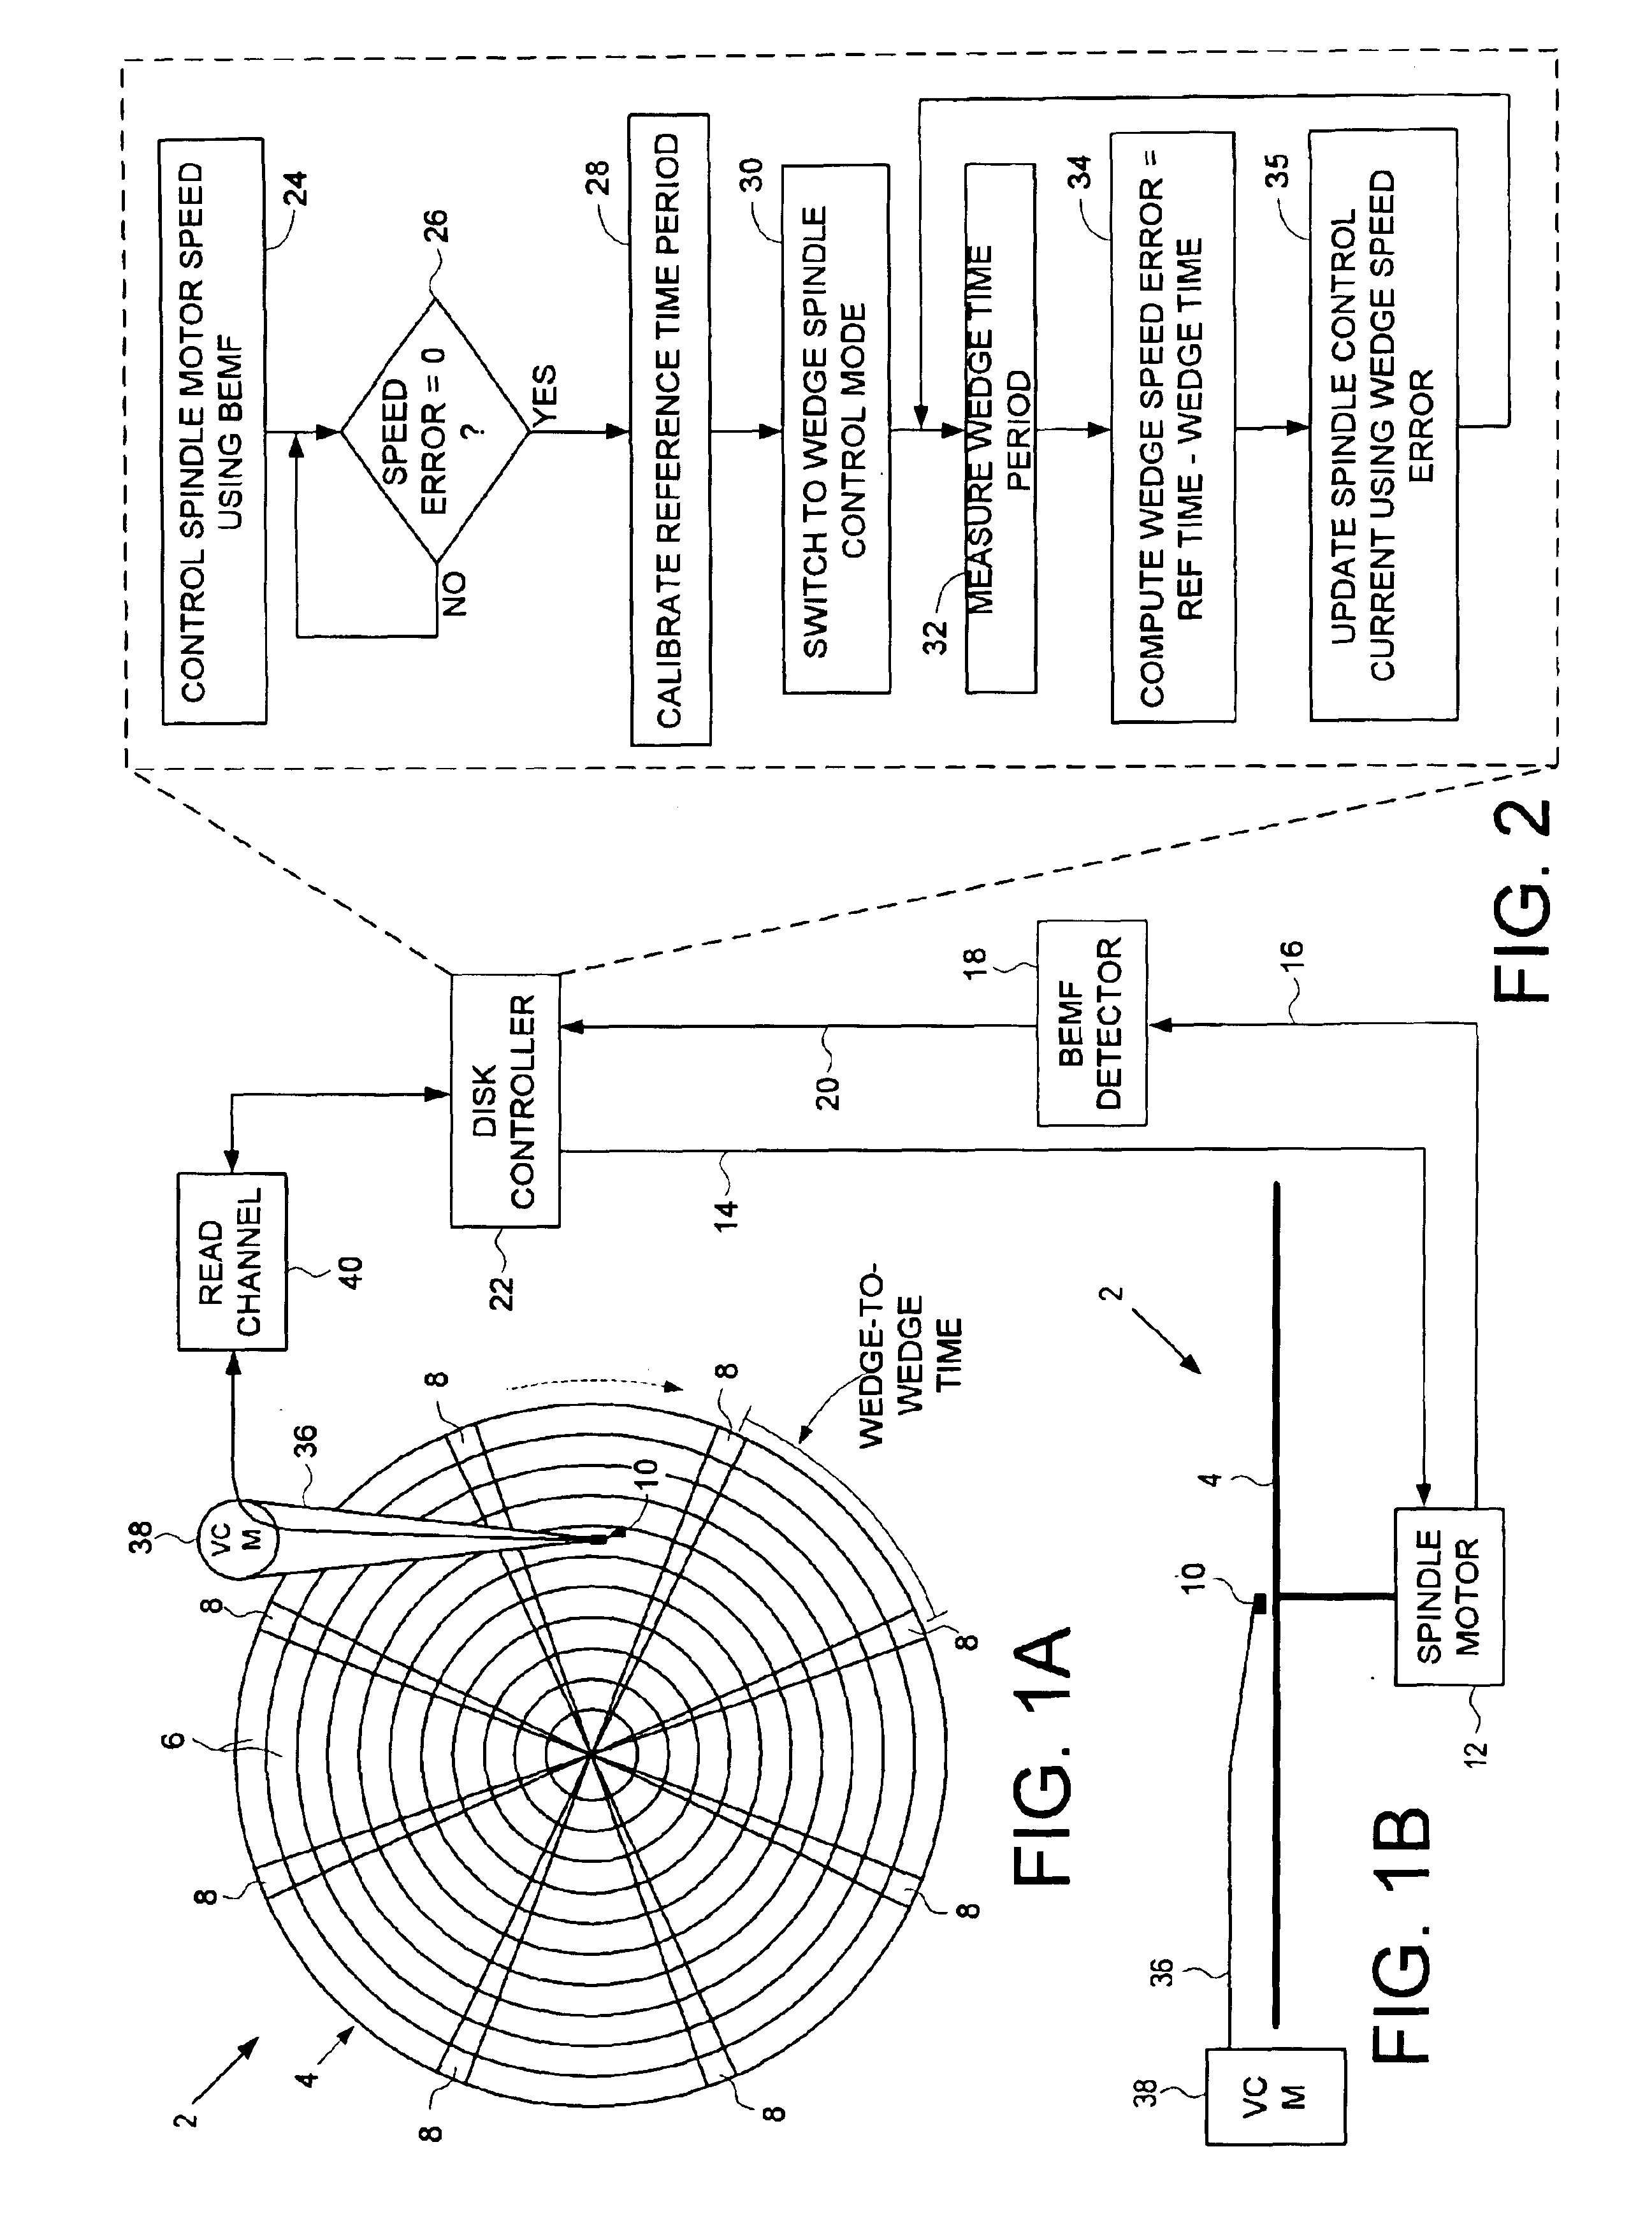 Disk drive employing BEMF spindle speed control or wedge spindle speed control